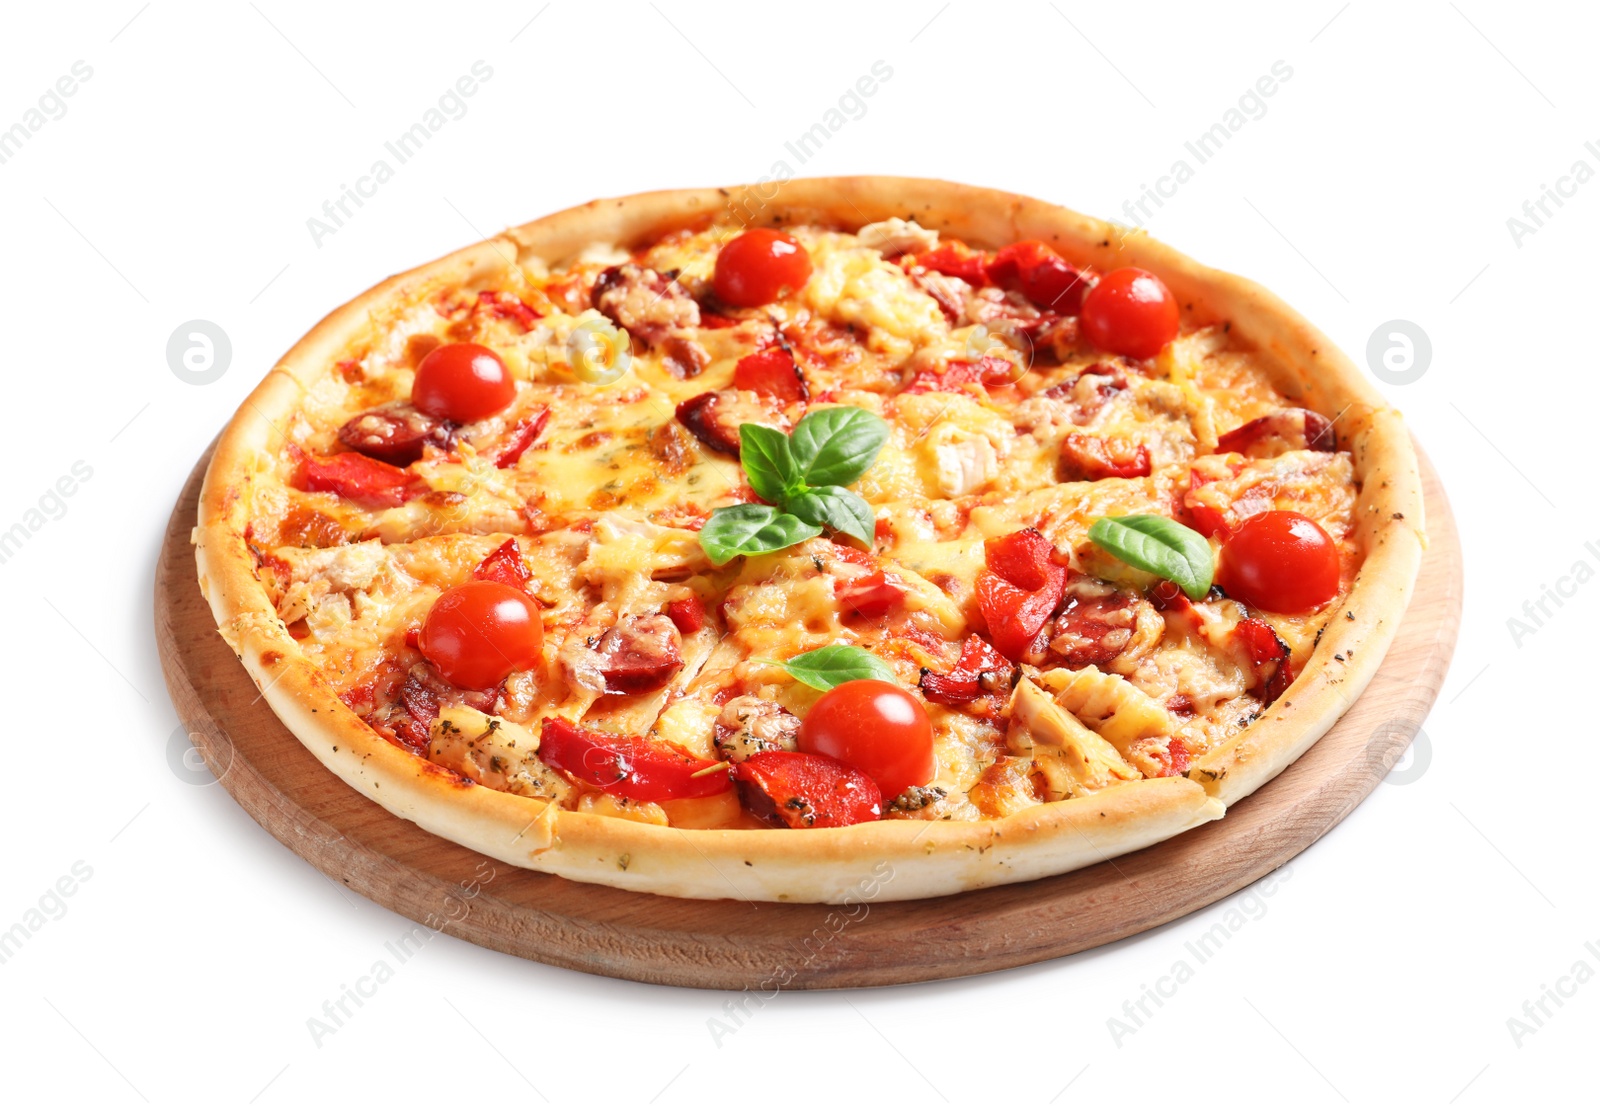 Photo of Delicious pizza with tomatoes and sausages on white background